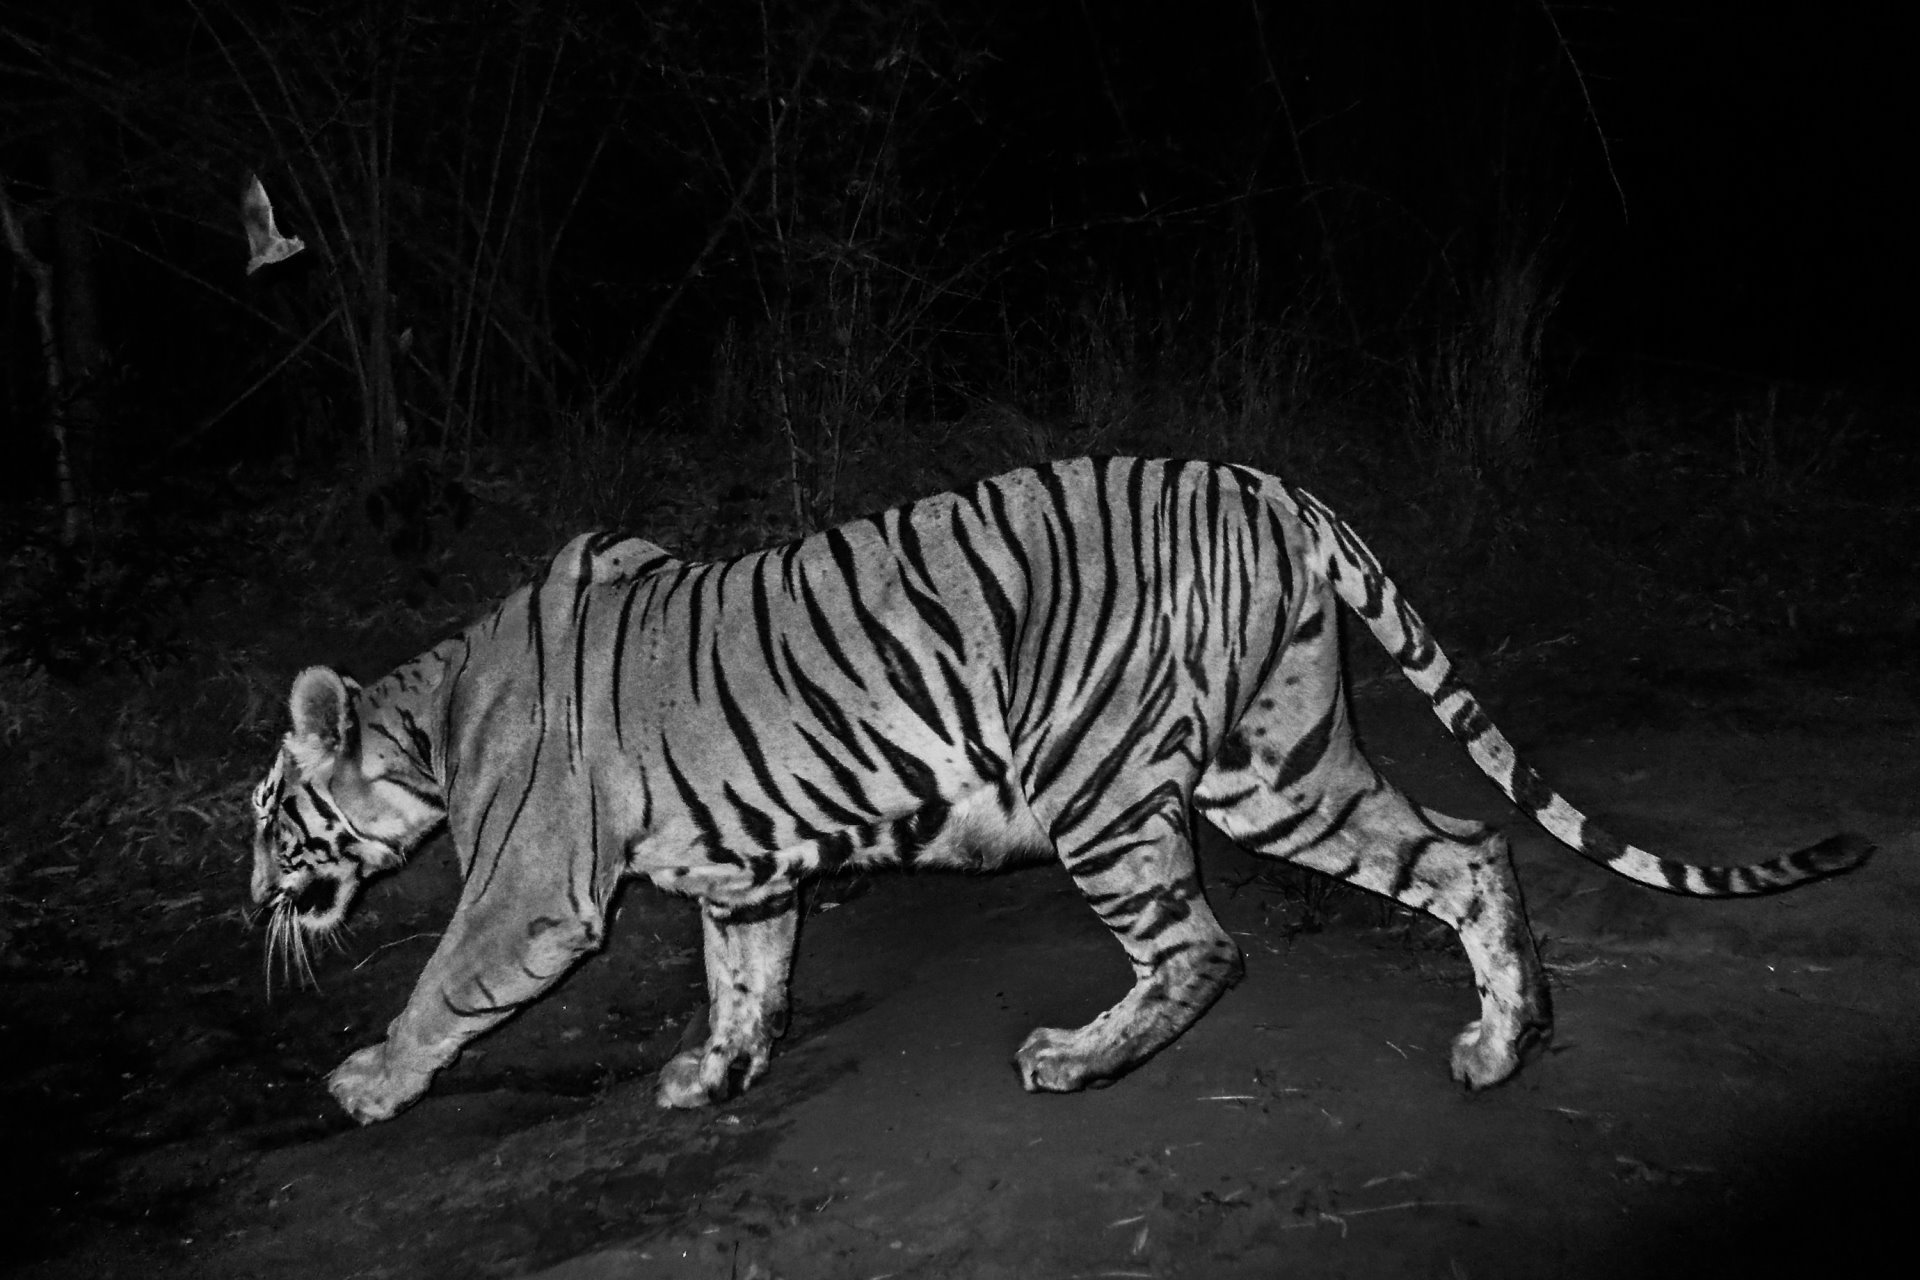 A motion sensor camera captures the image of a tiger that has entered a village in the district of Chandrapur, in Maharashtra, India.